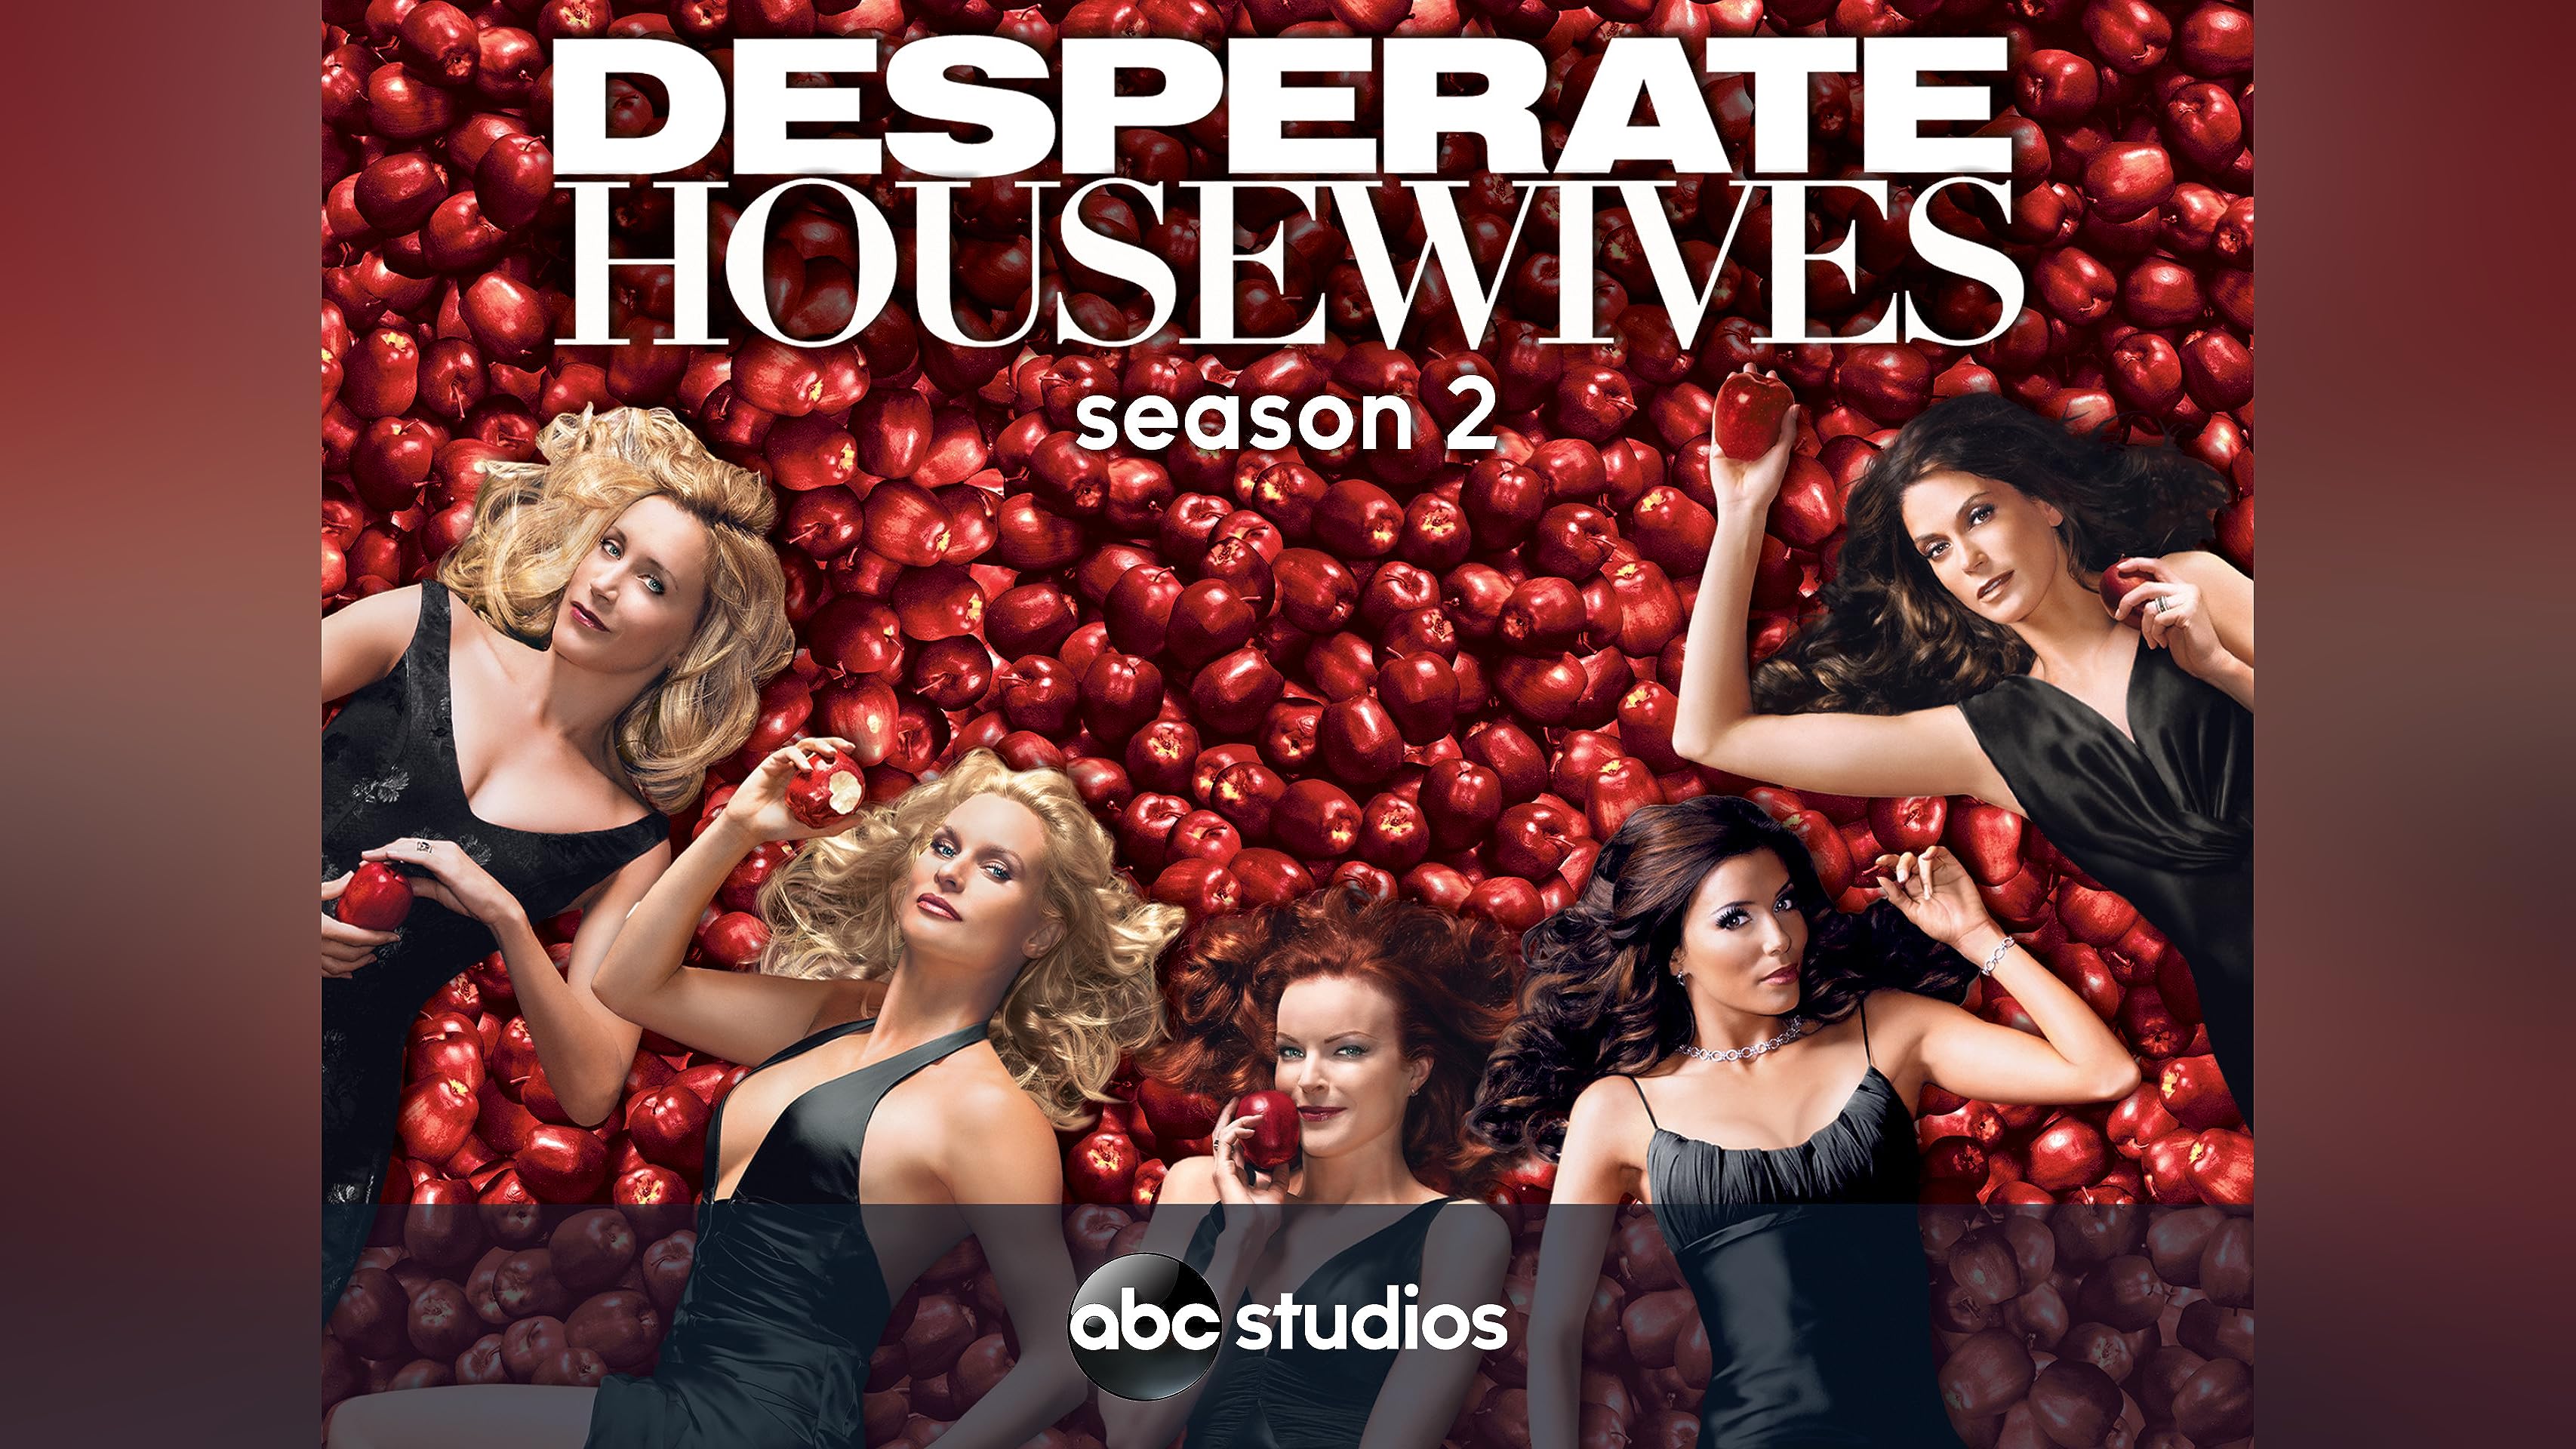 andrew boyan recommends Desperate Housewives Episode 2